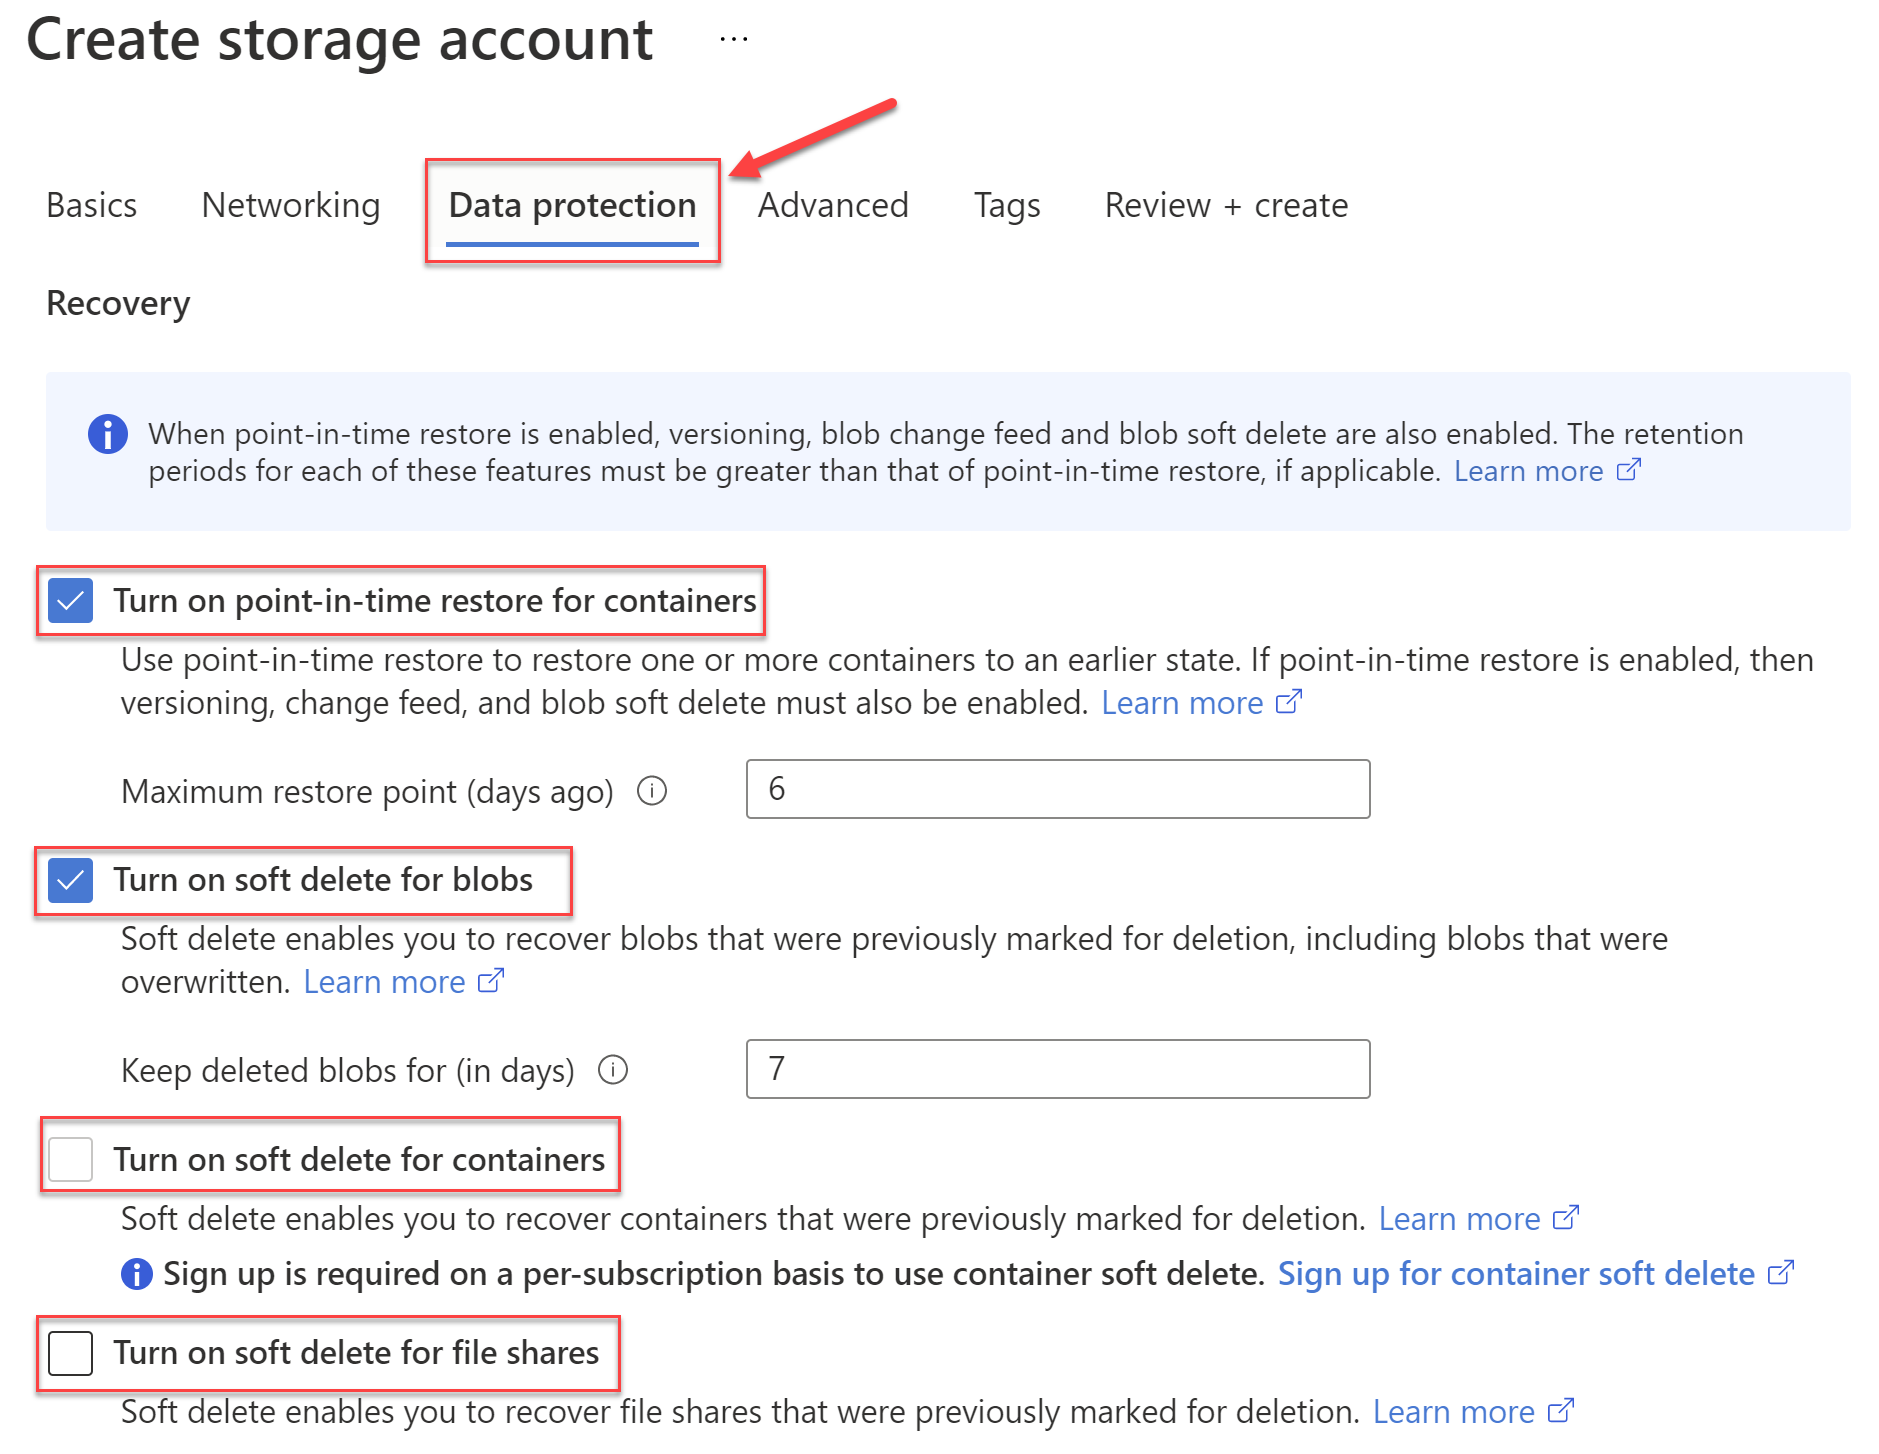 Soft delete options in a Storage Account creation